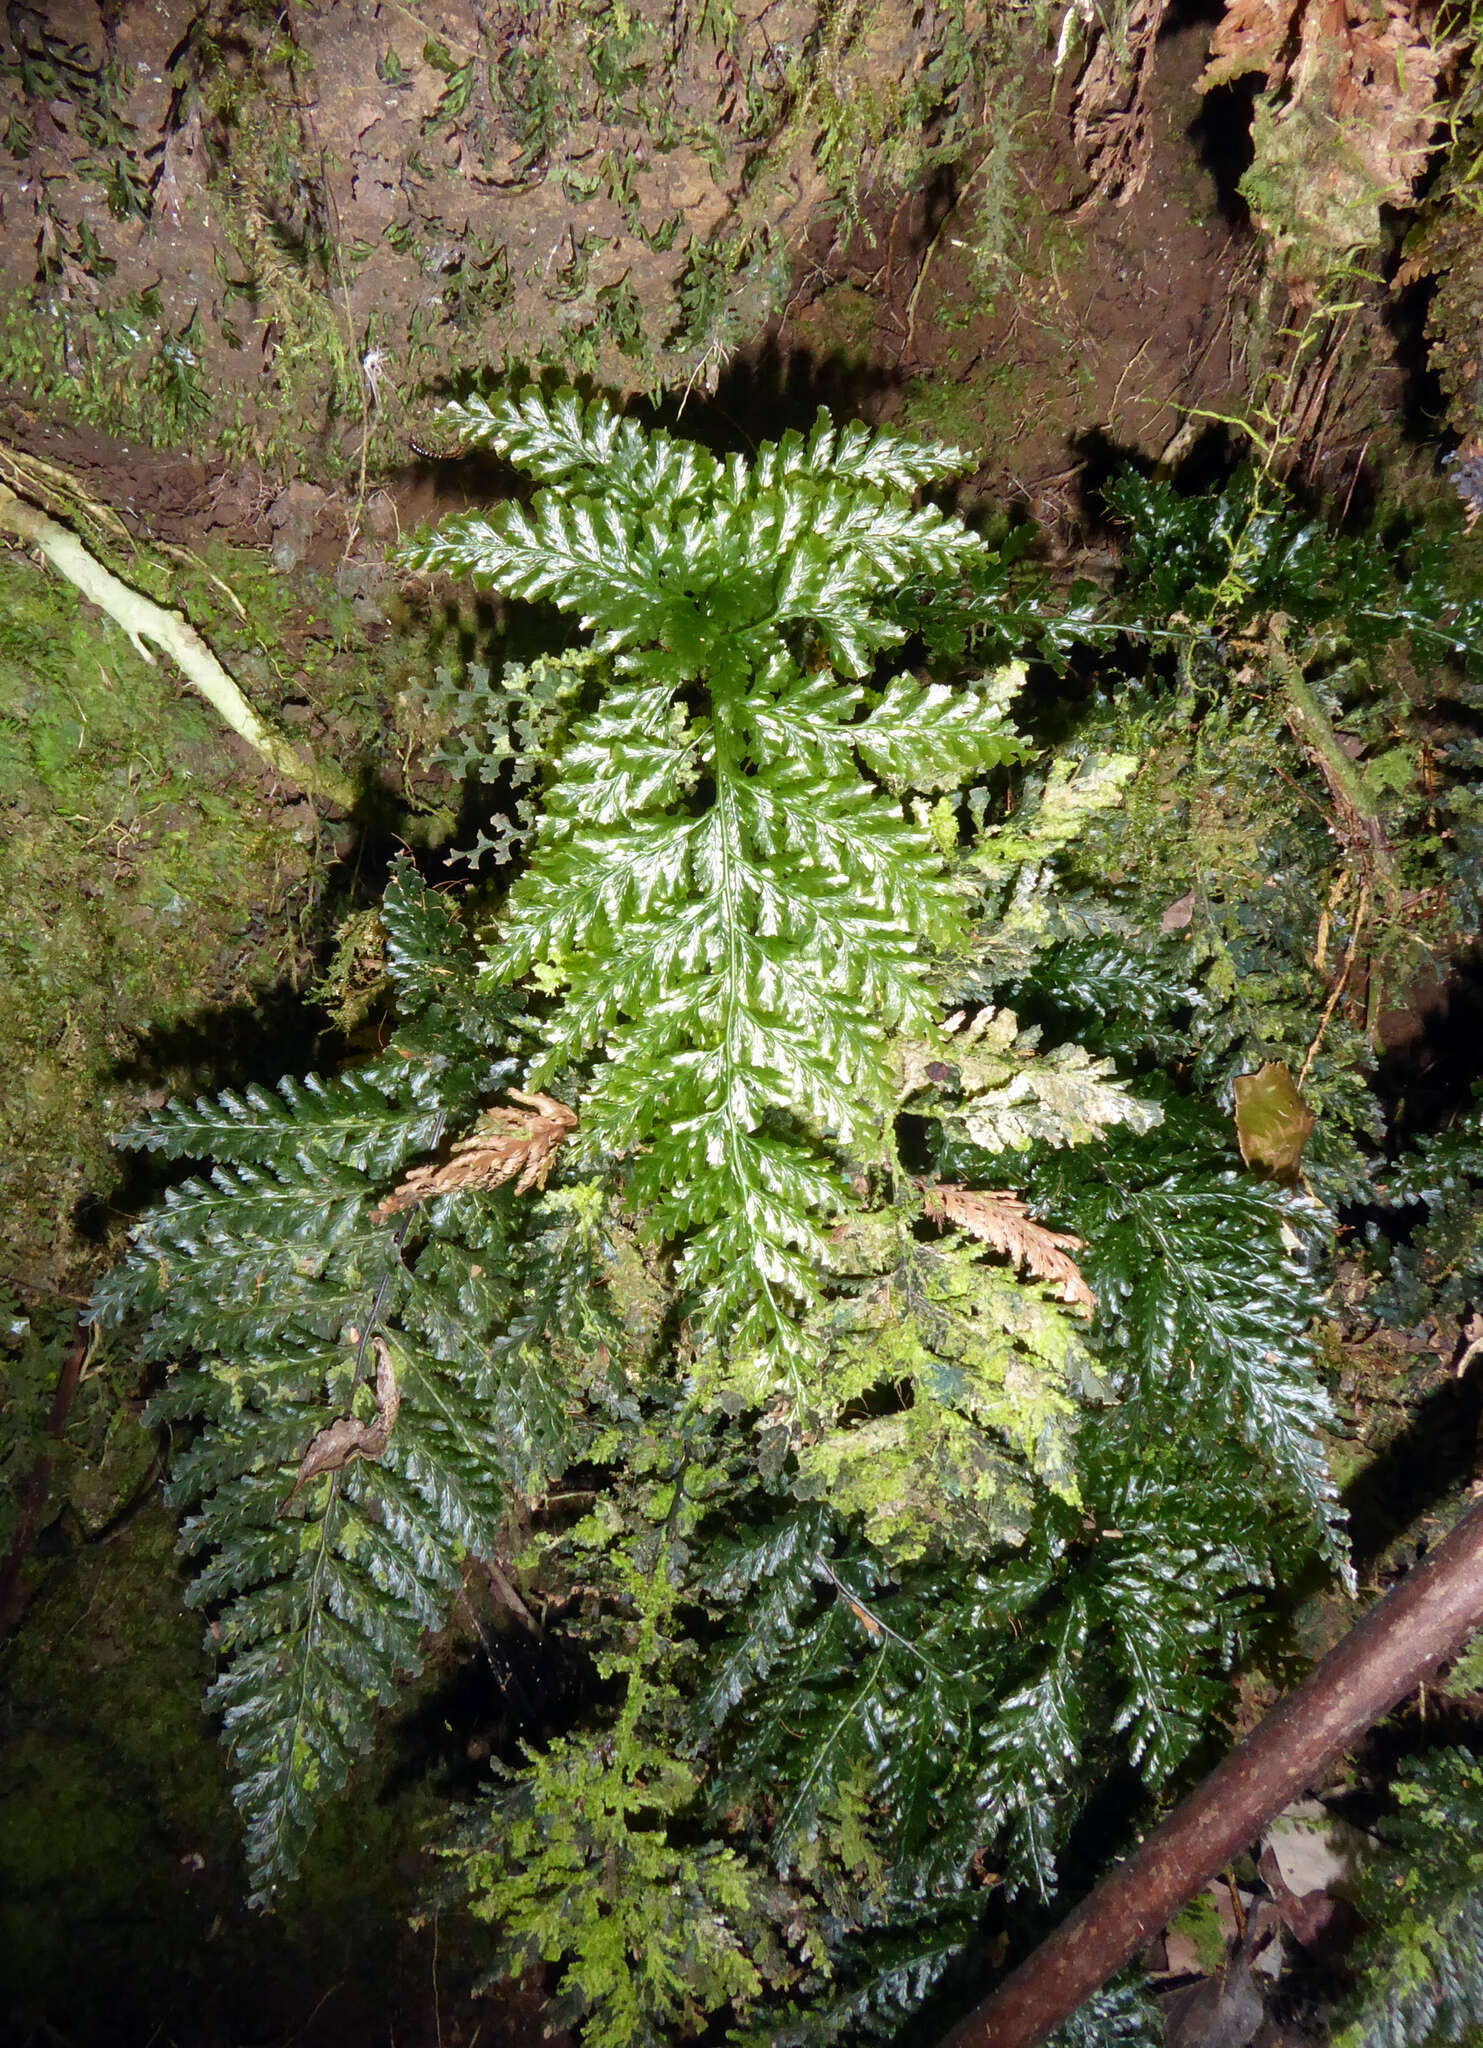 Image of toothed bristle fern